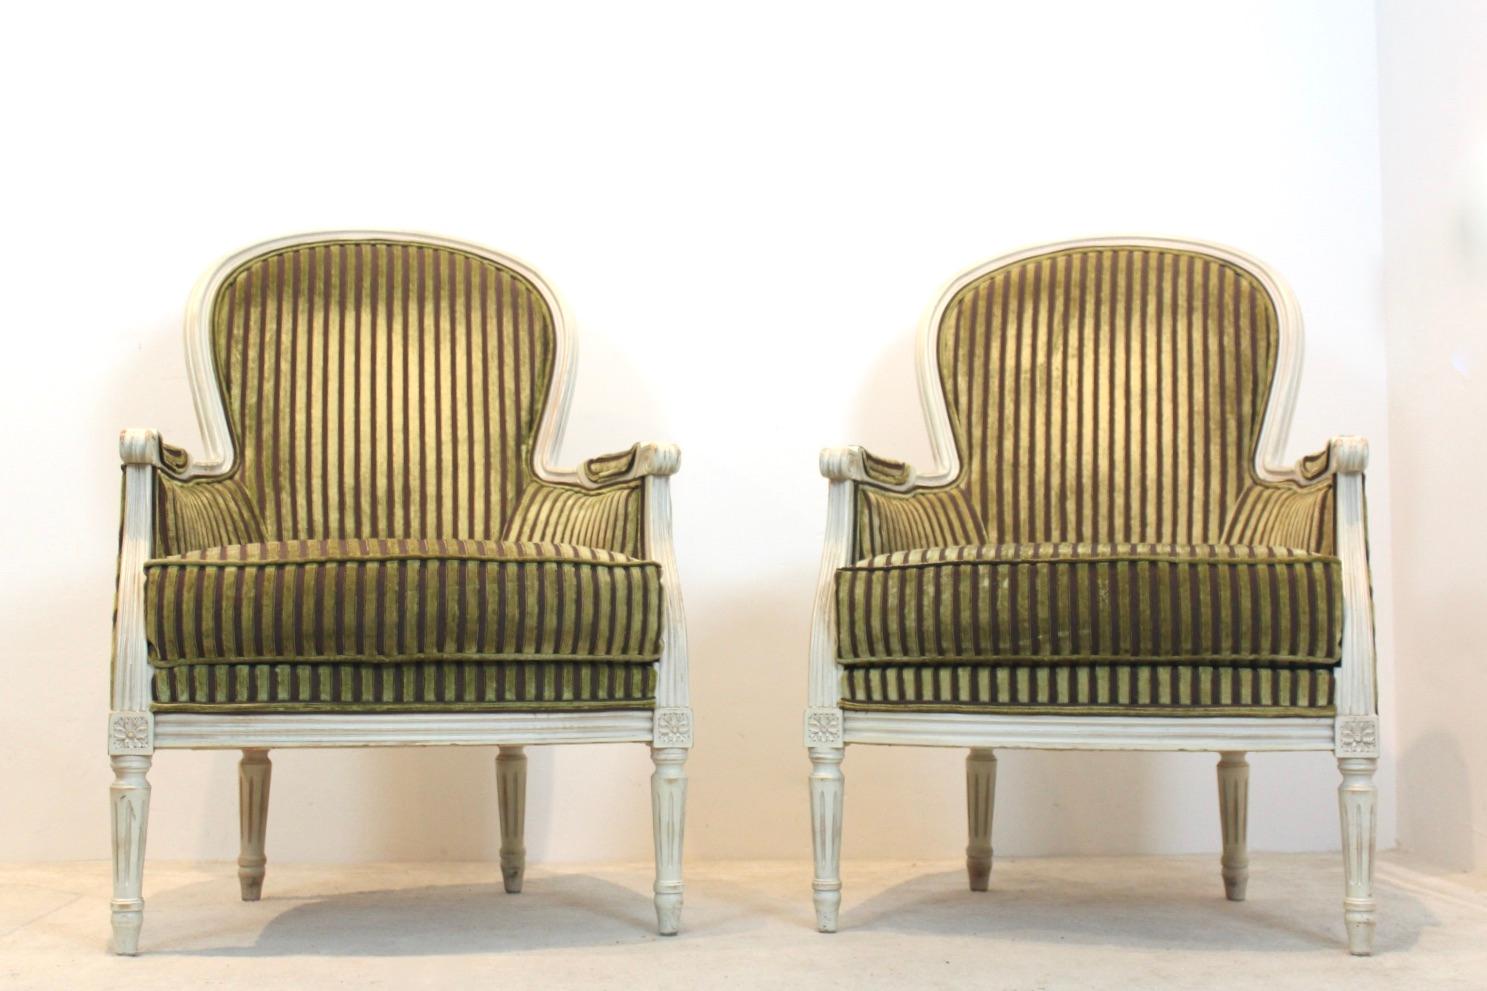 20th Century Pair of Louis XVI Style Bergère Chairs by Rosello Paris, France